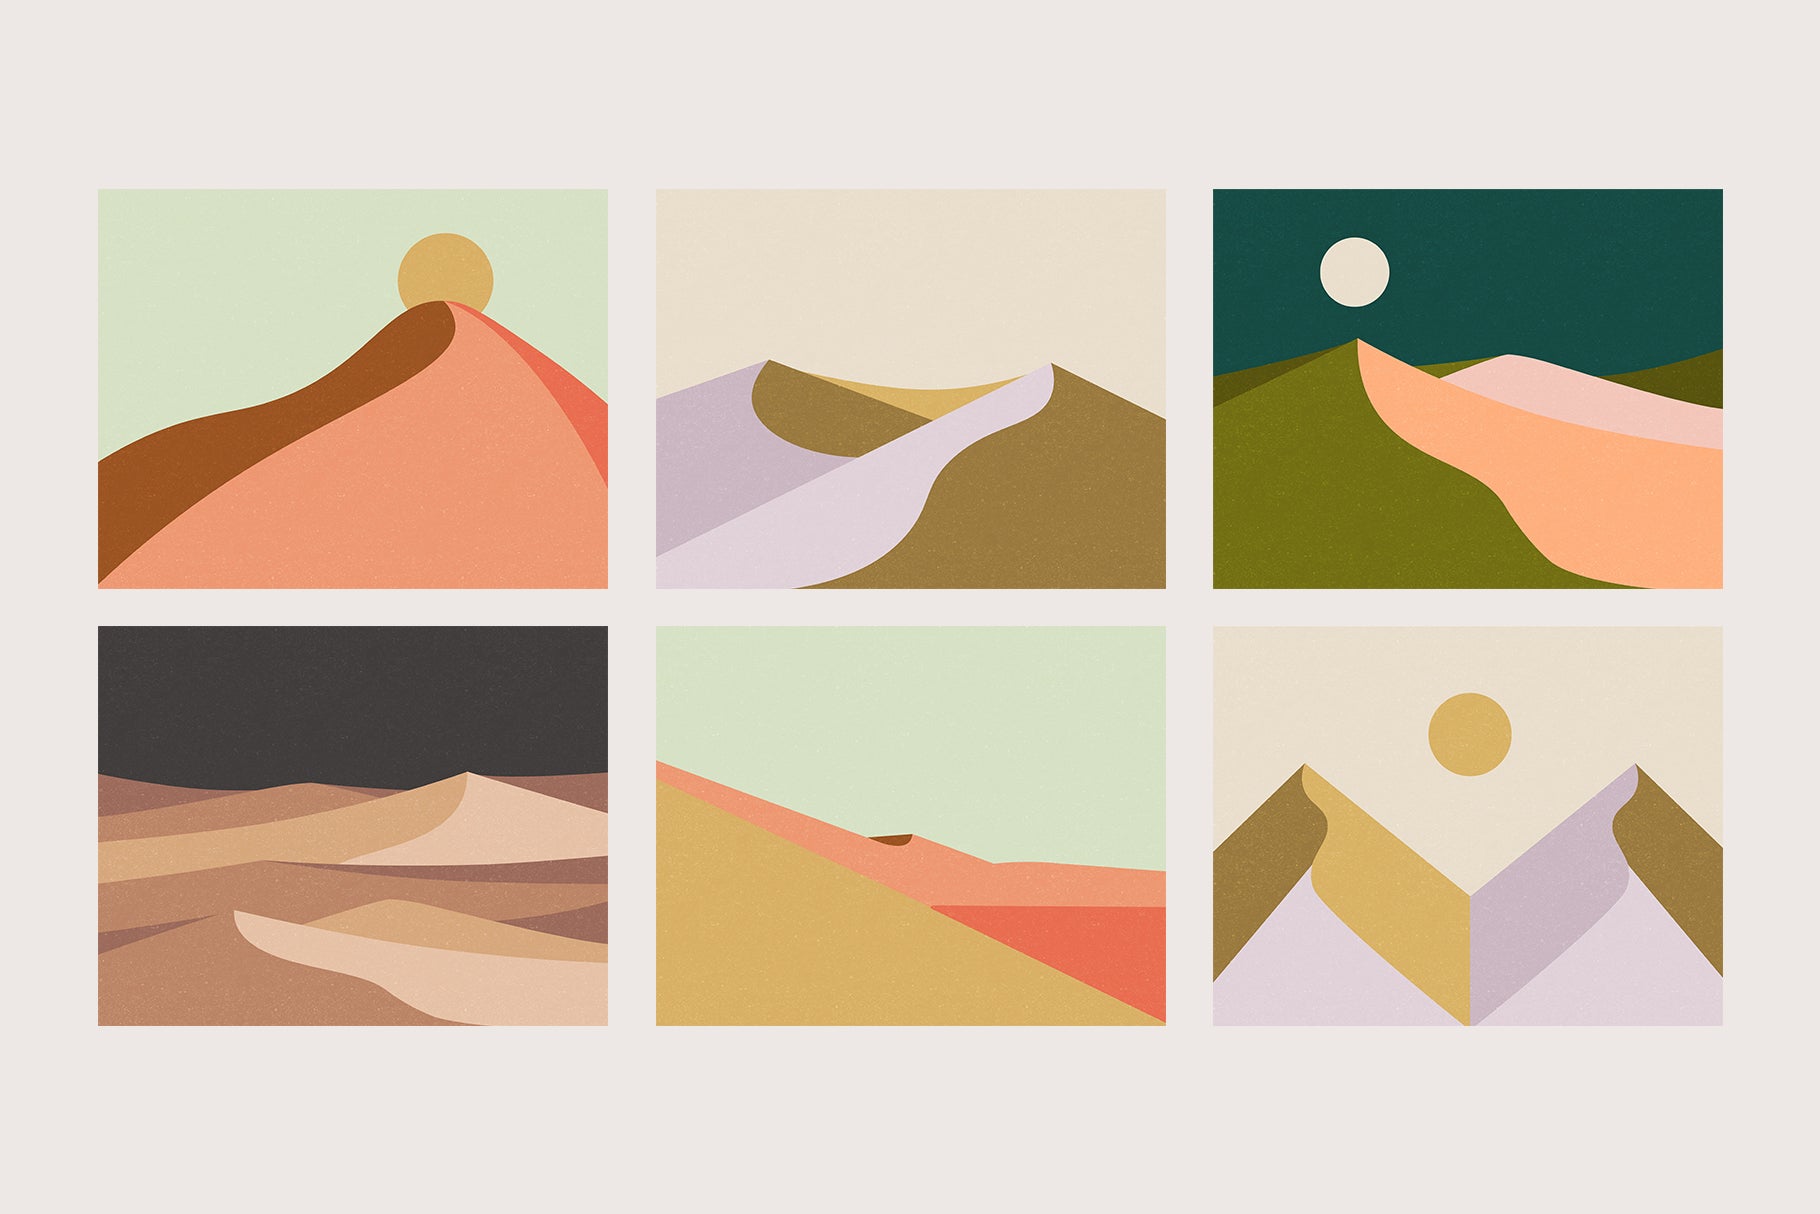 six graphic illustrations featuring landscape scenery